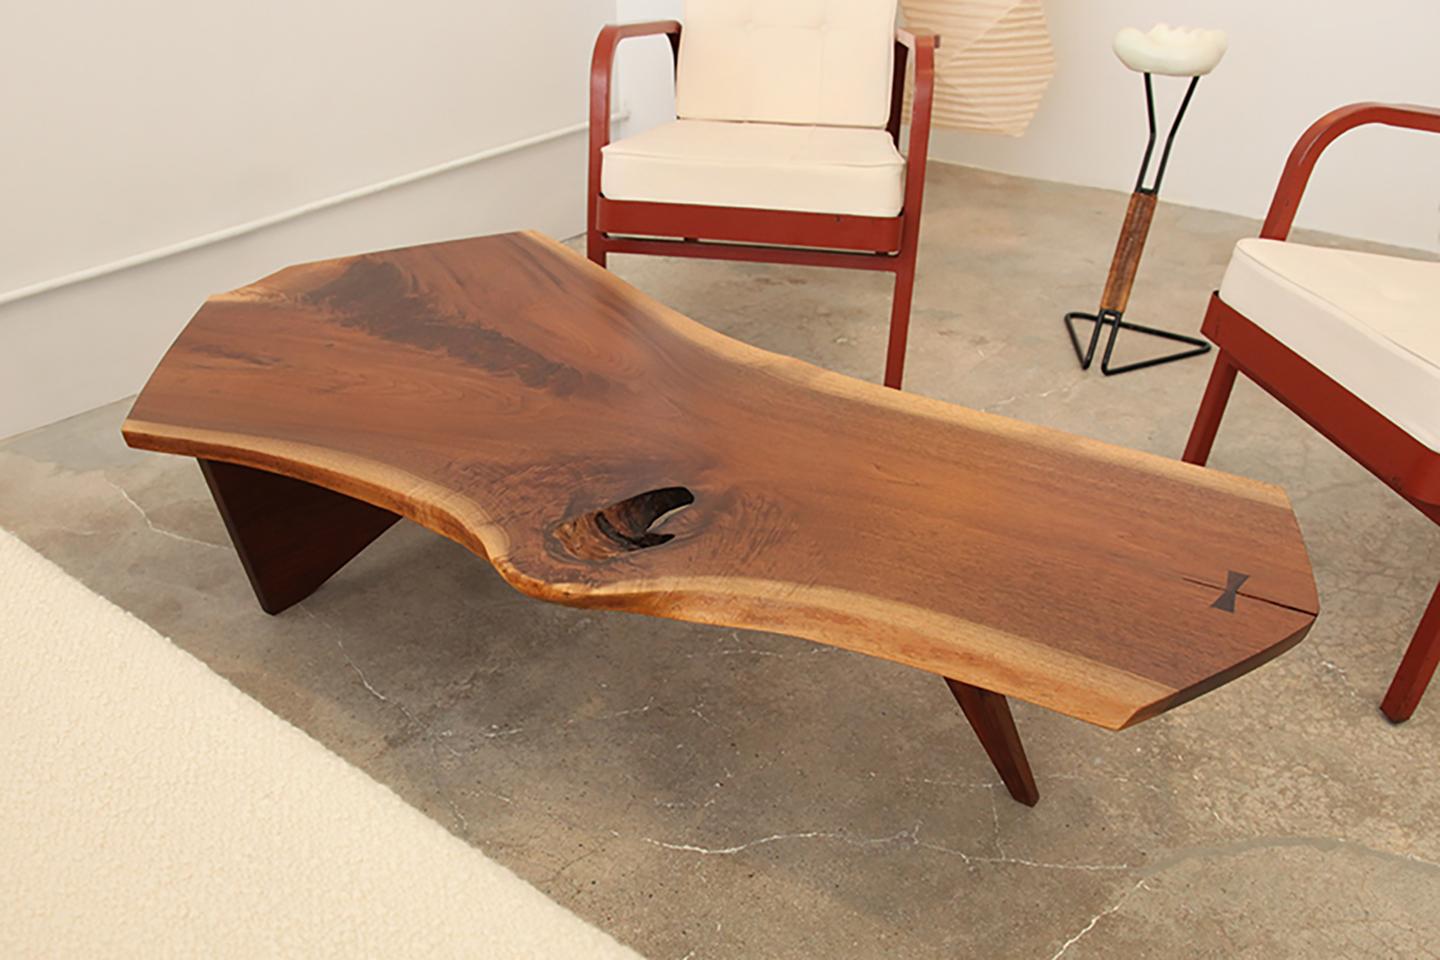 A beautiful and soulful, free-from slab coffee table in walnut by George Nakashima, New Hope, PA, circa 1960. Marked underneath with clients name.